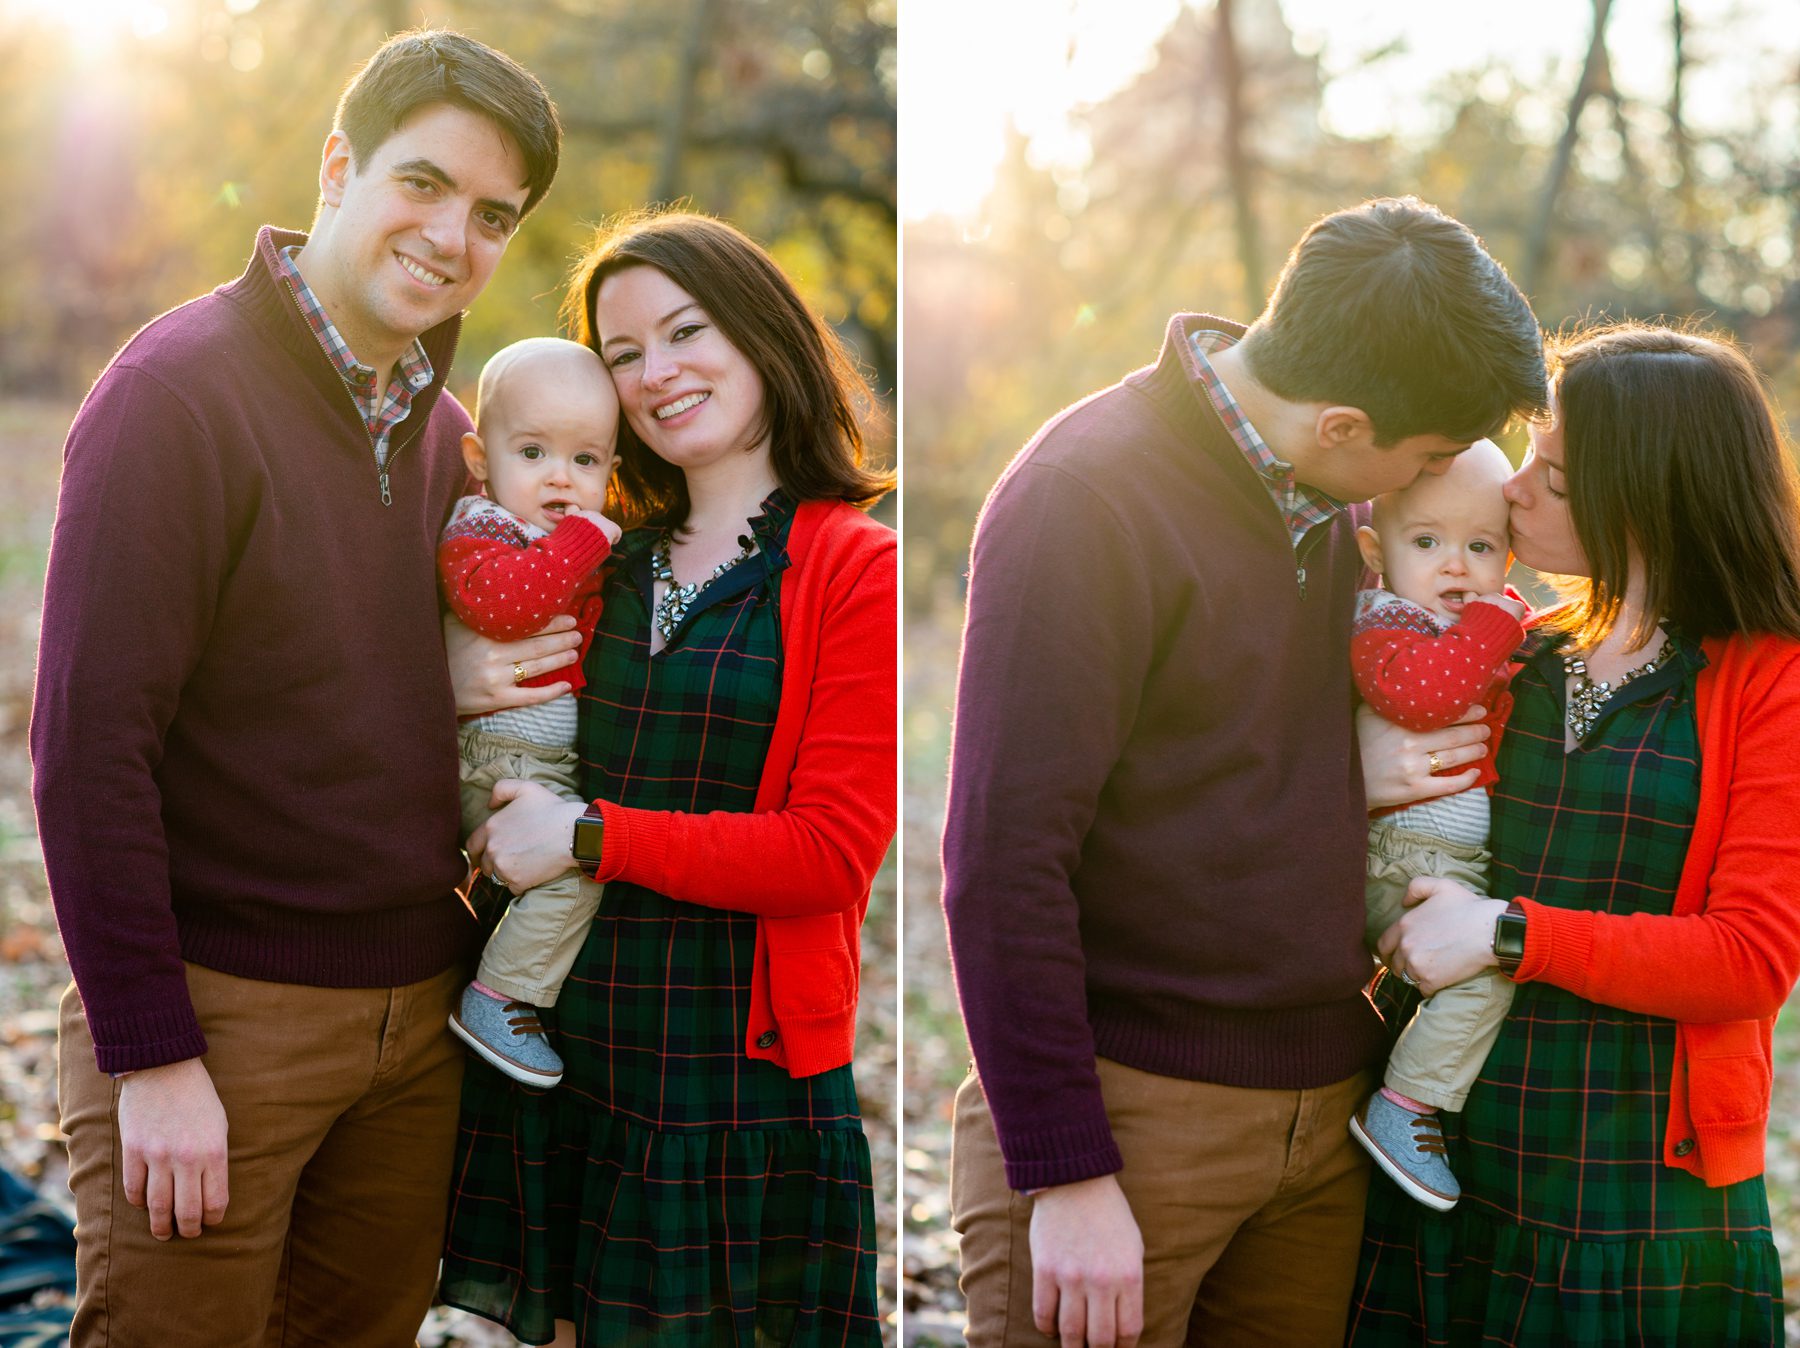 Central Park Family Photography